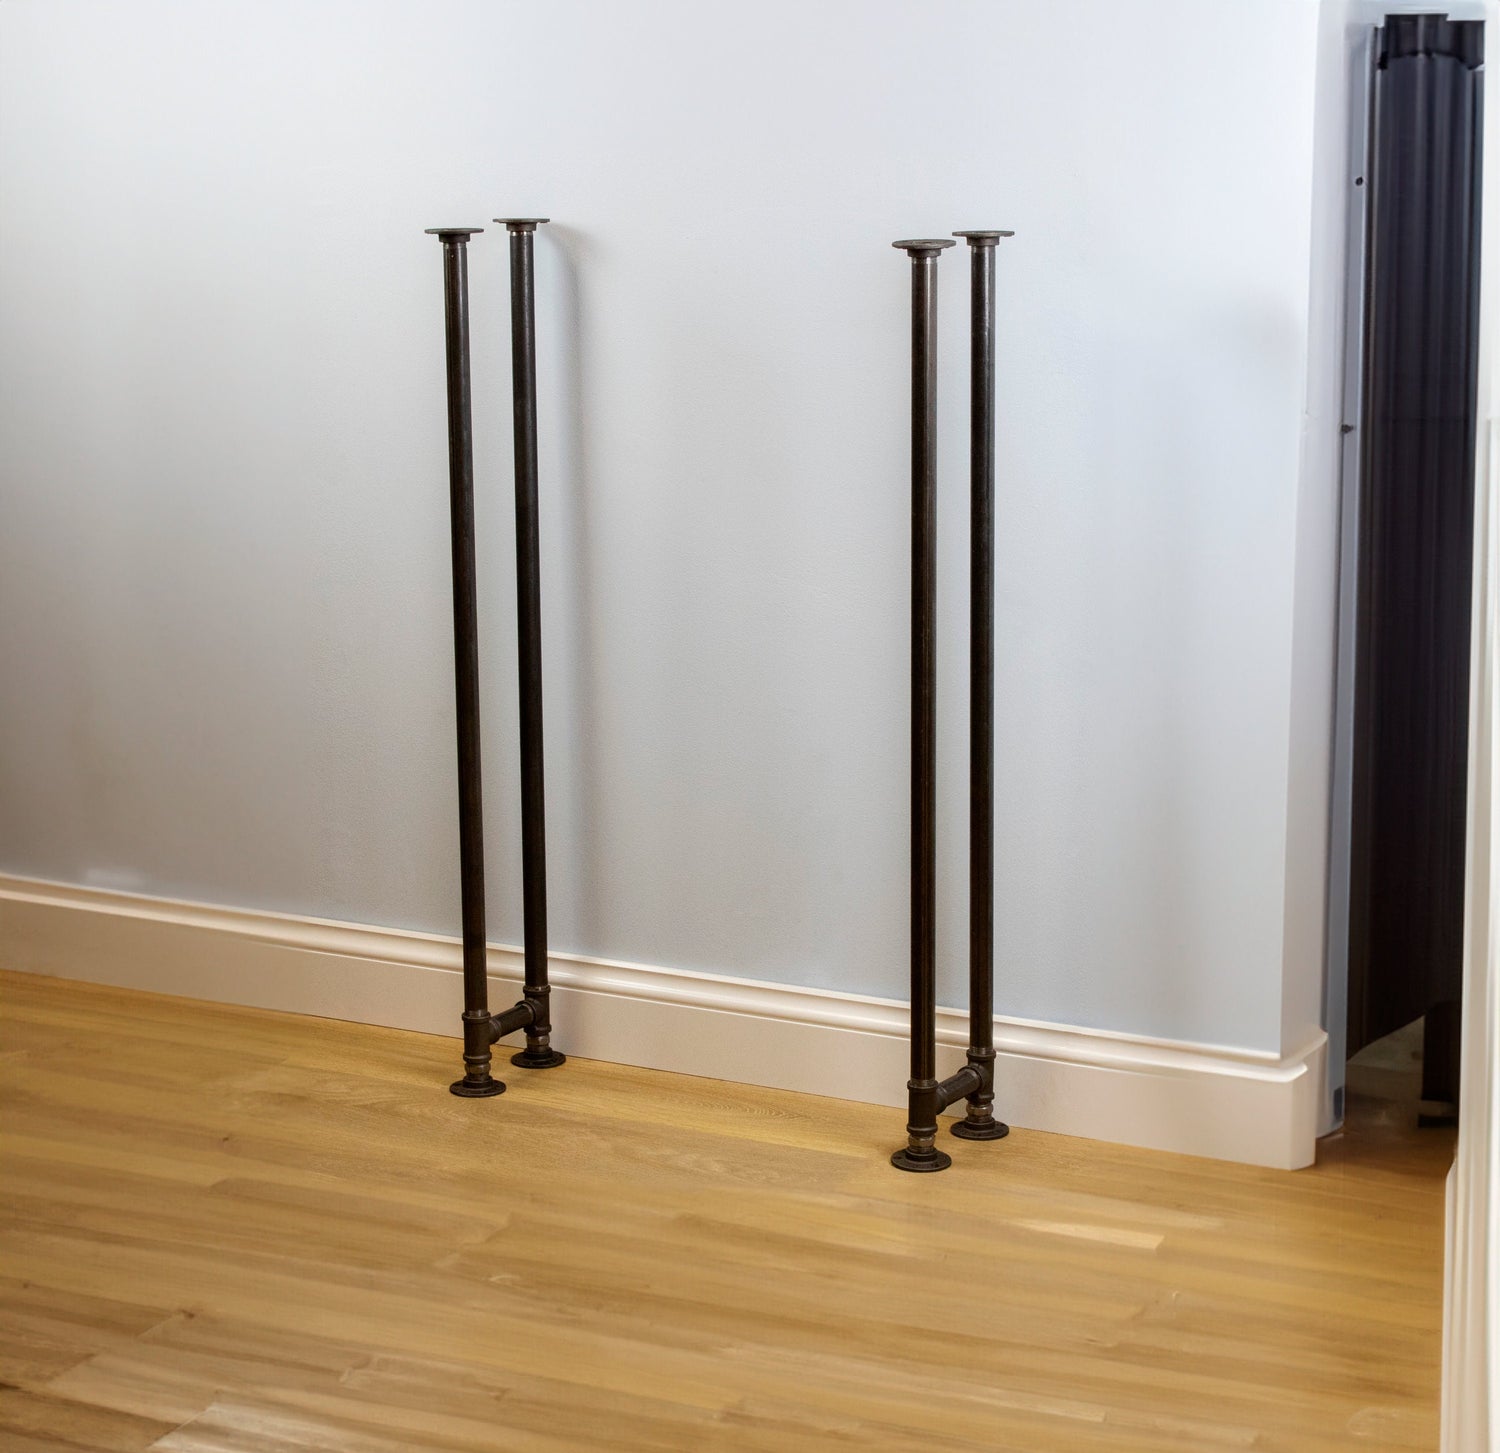 Elegant Console Tables and Hallway Tables, showcasing black, wood, and storage designs